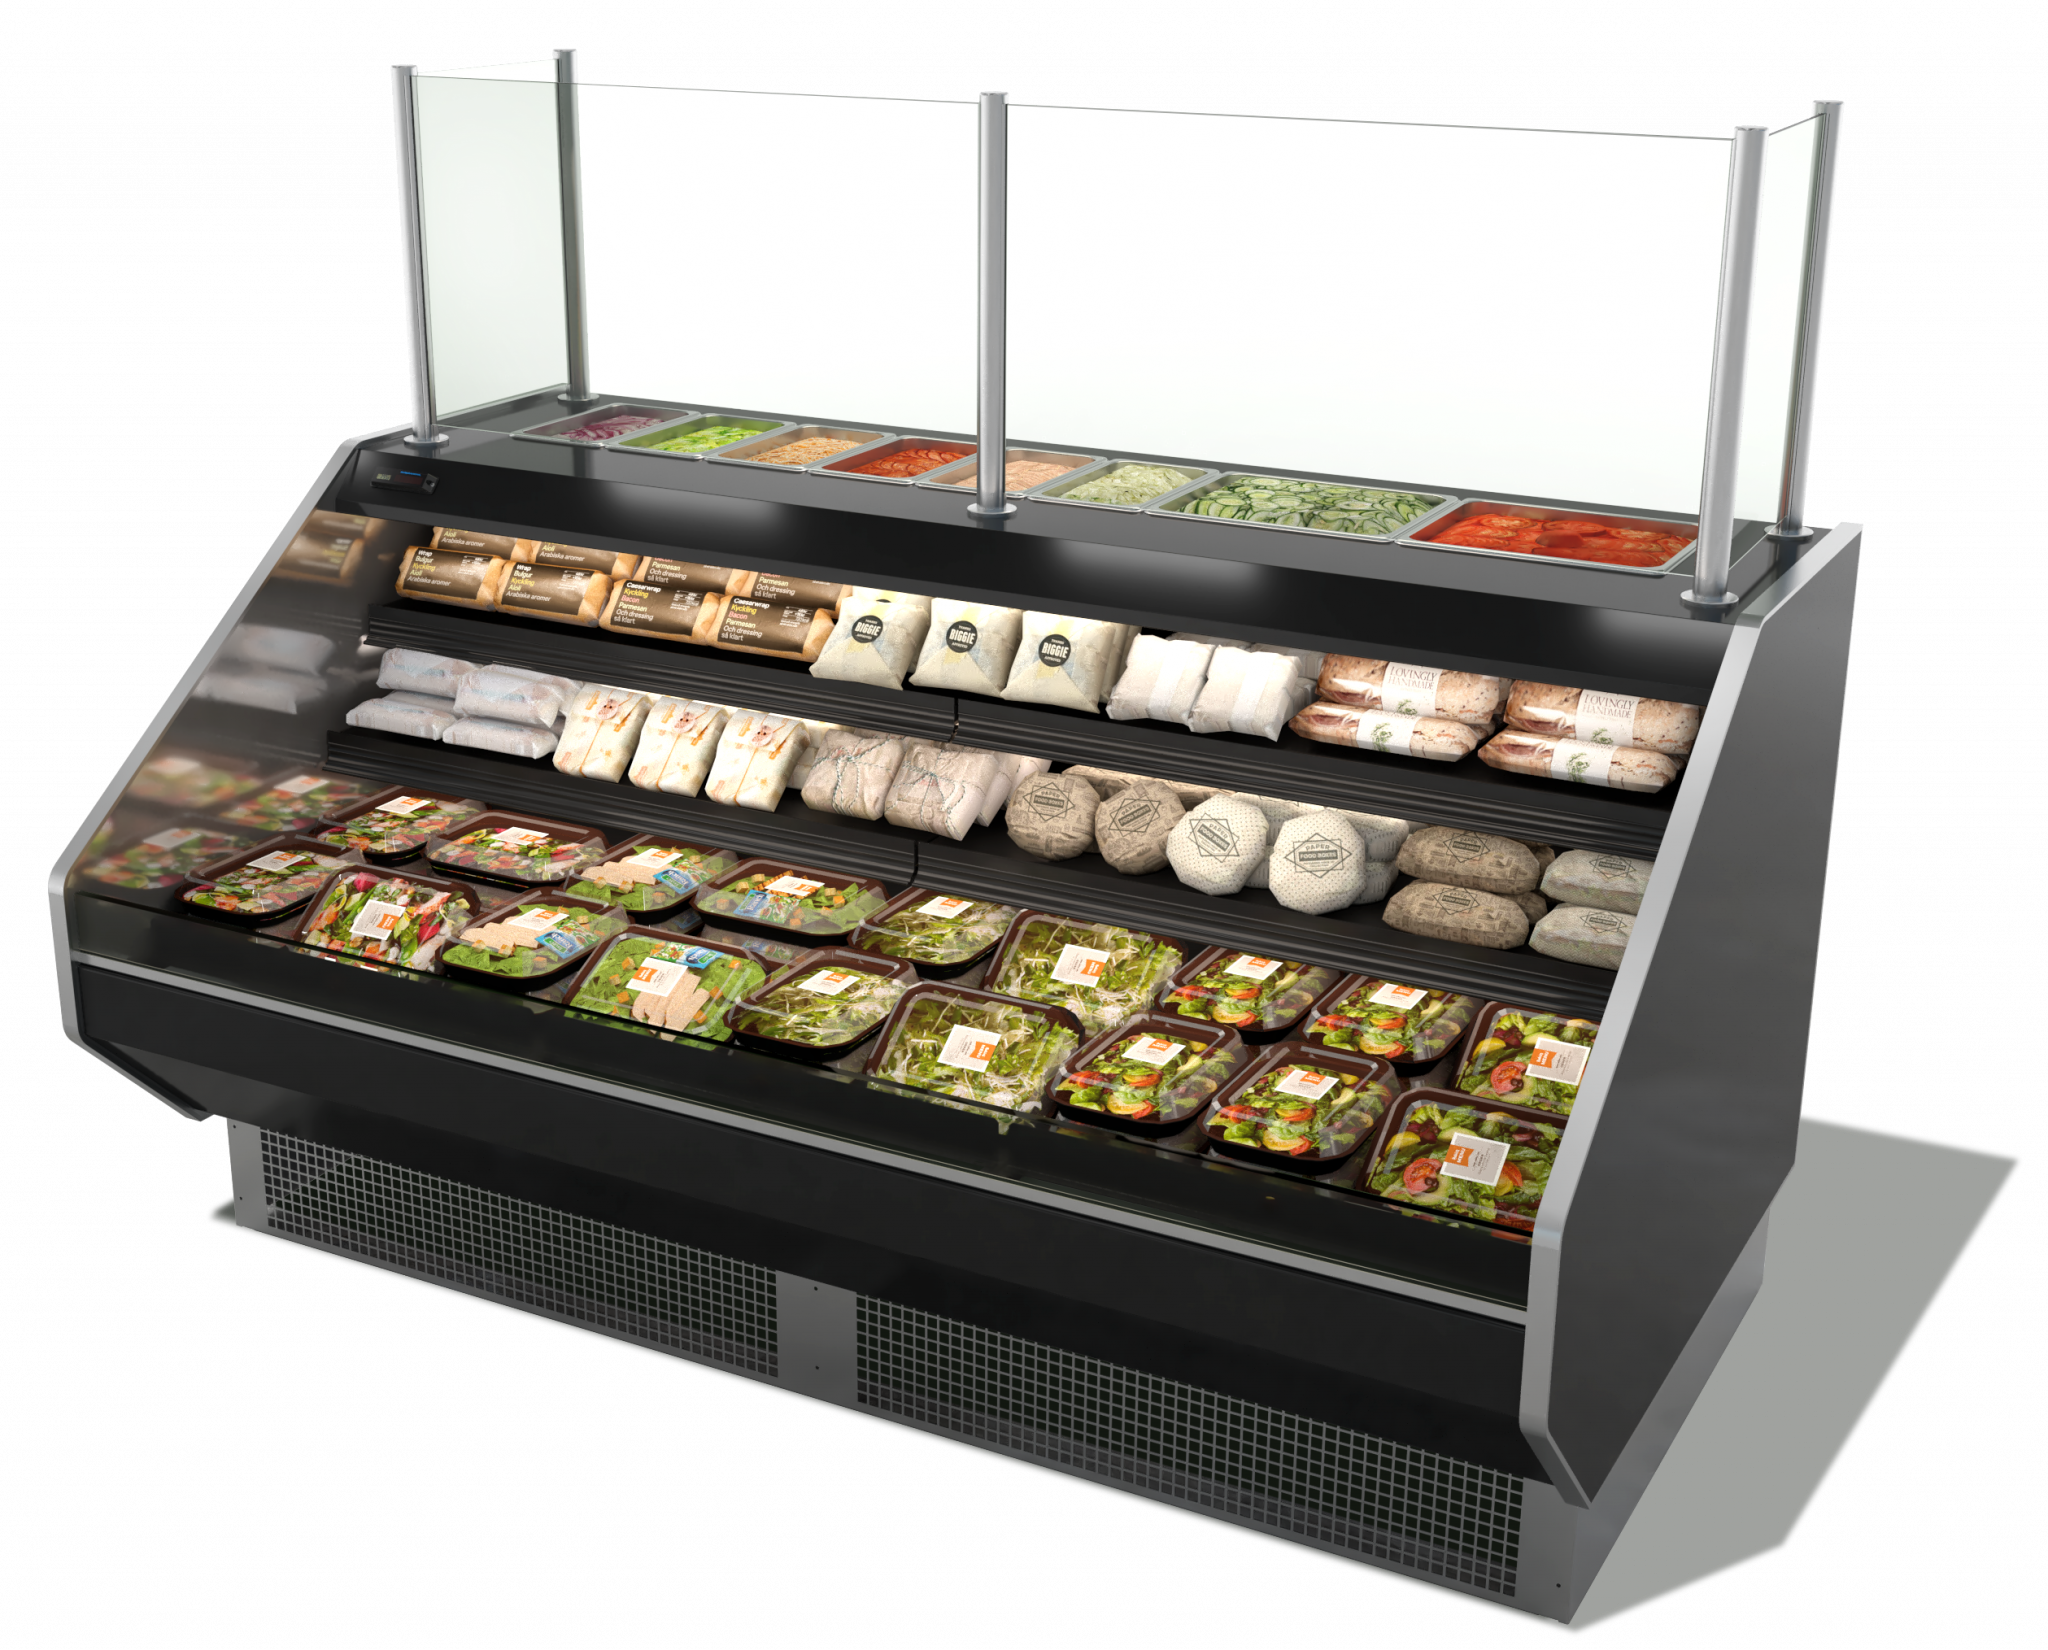 Hillphoenix PT-R Multi-Deck, Self-Service, Refrigerated Display Cases for Retail